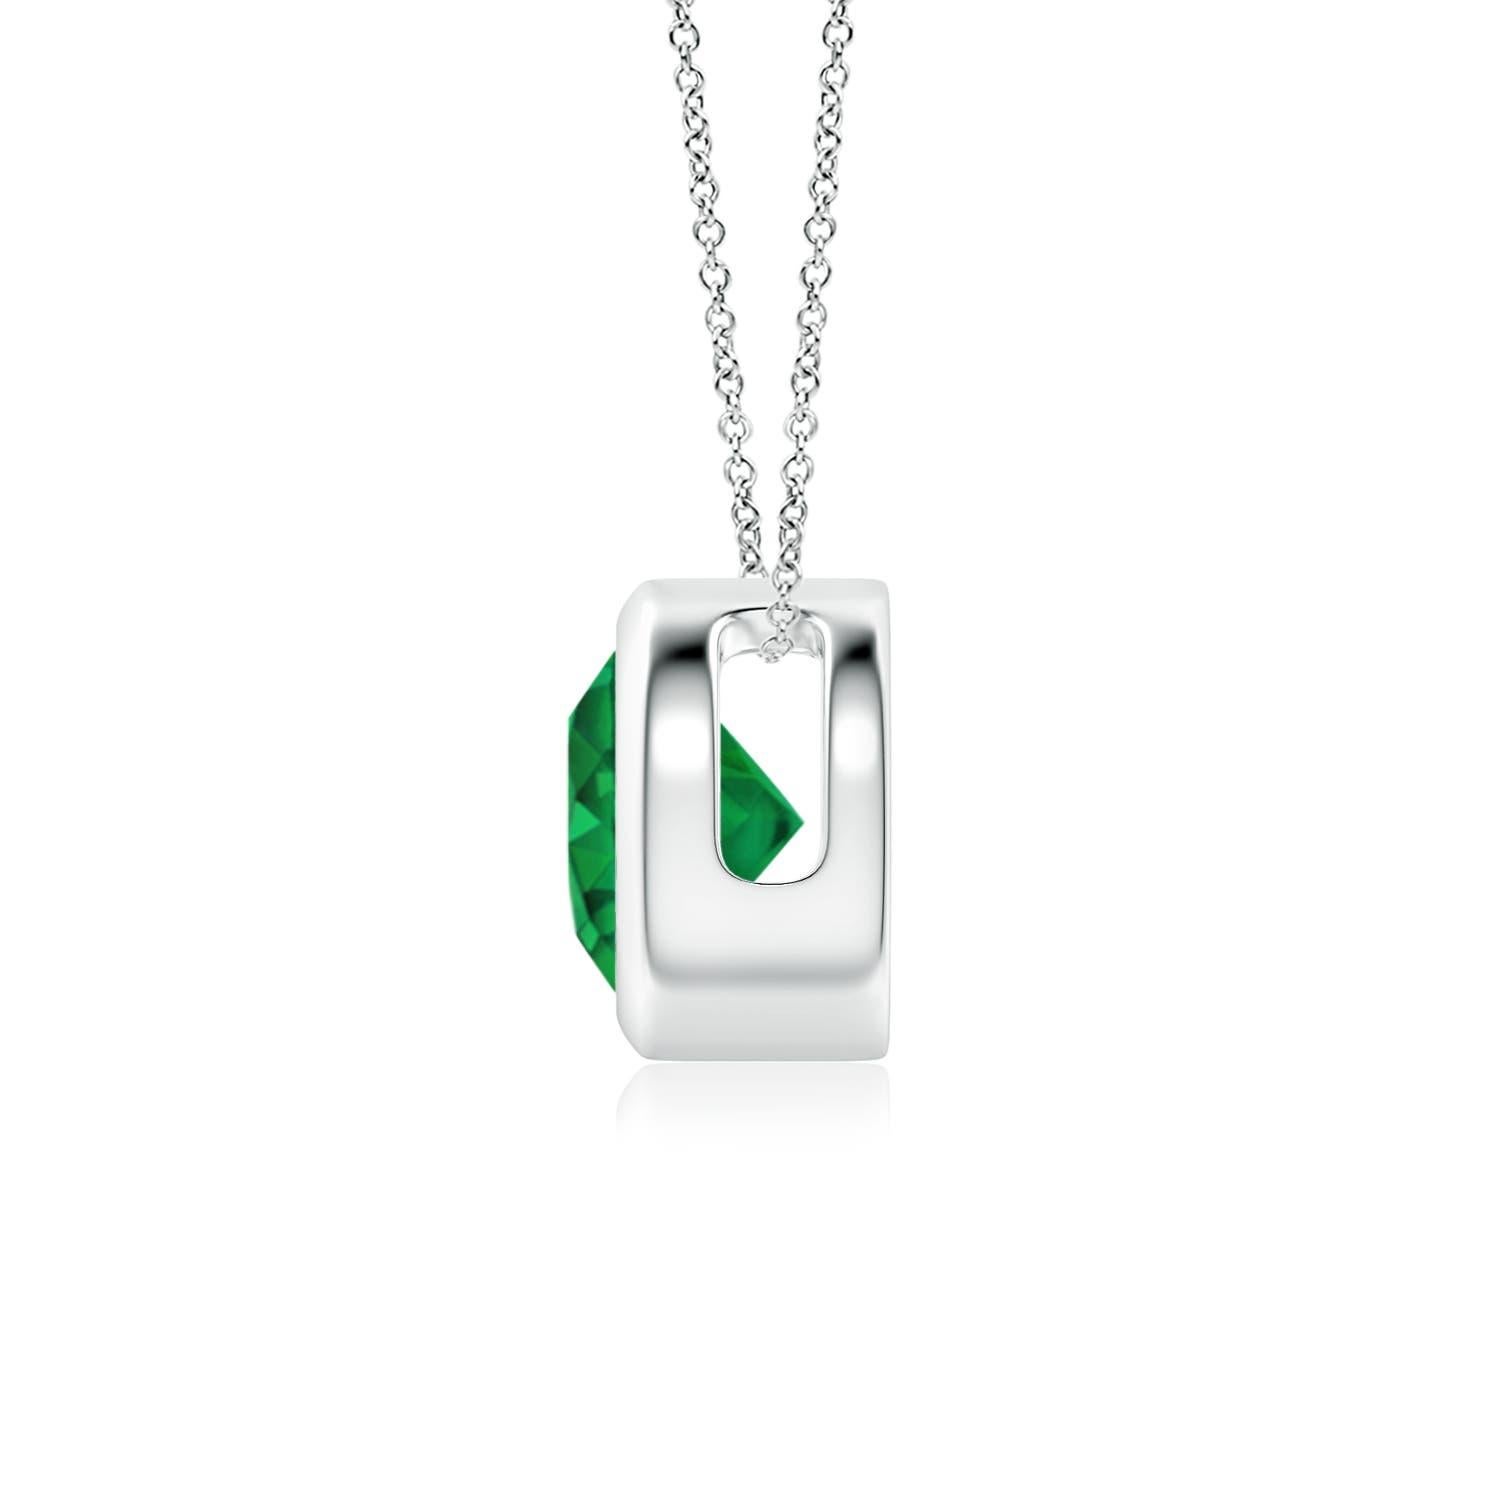 This classic solitaire emerald pendant's beautiful design makes the center stone appear like it's floating on the chain. The lush green emerald is secured in a bezel setting. Crafted in 14k white gold, this round emerald pendant is simple yet